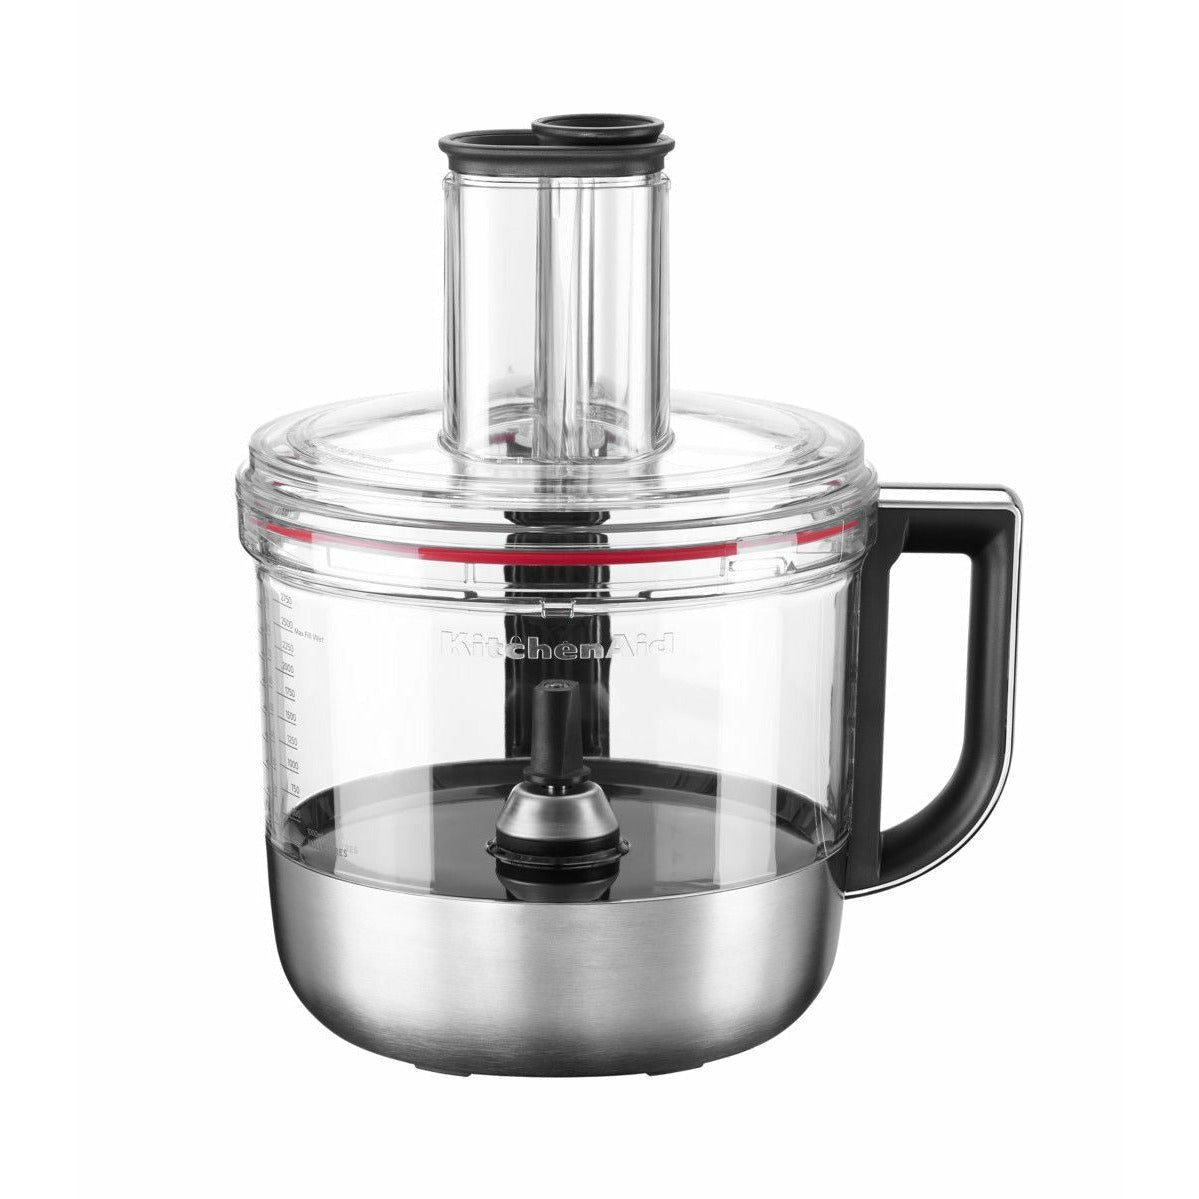 Kitchen Aid 5 Kzfp11 Food Processor Attachment For Artisan Cook Processor